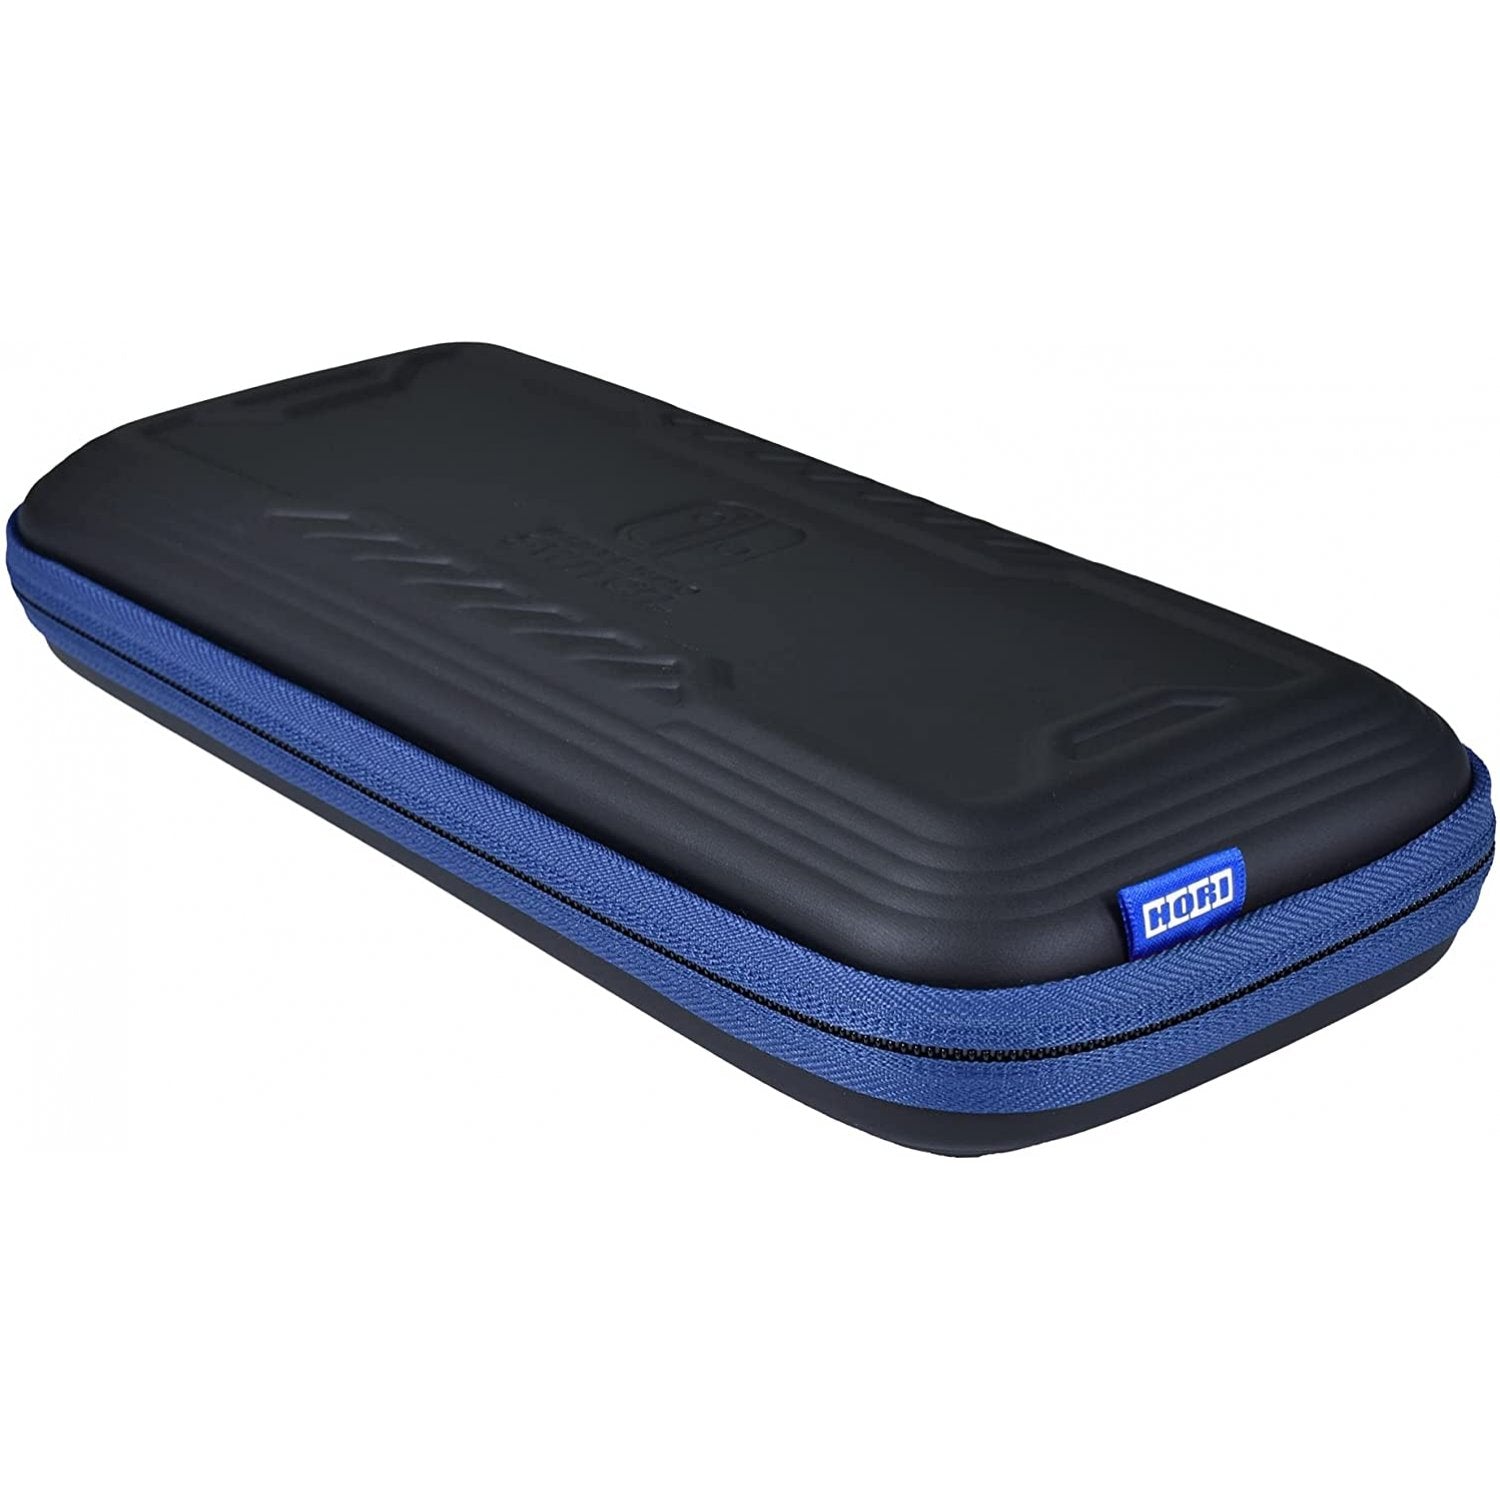 HORI NSW OLED Shock Absorption Tough Pouch Black/Blue (NSW-814)